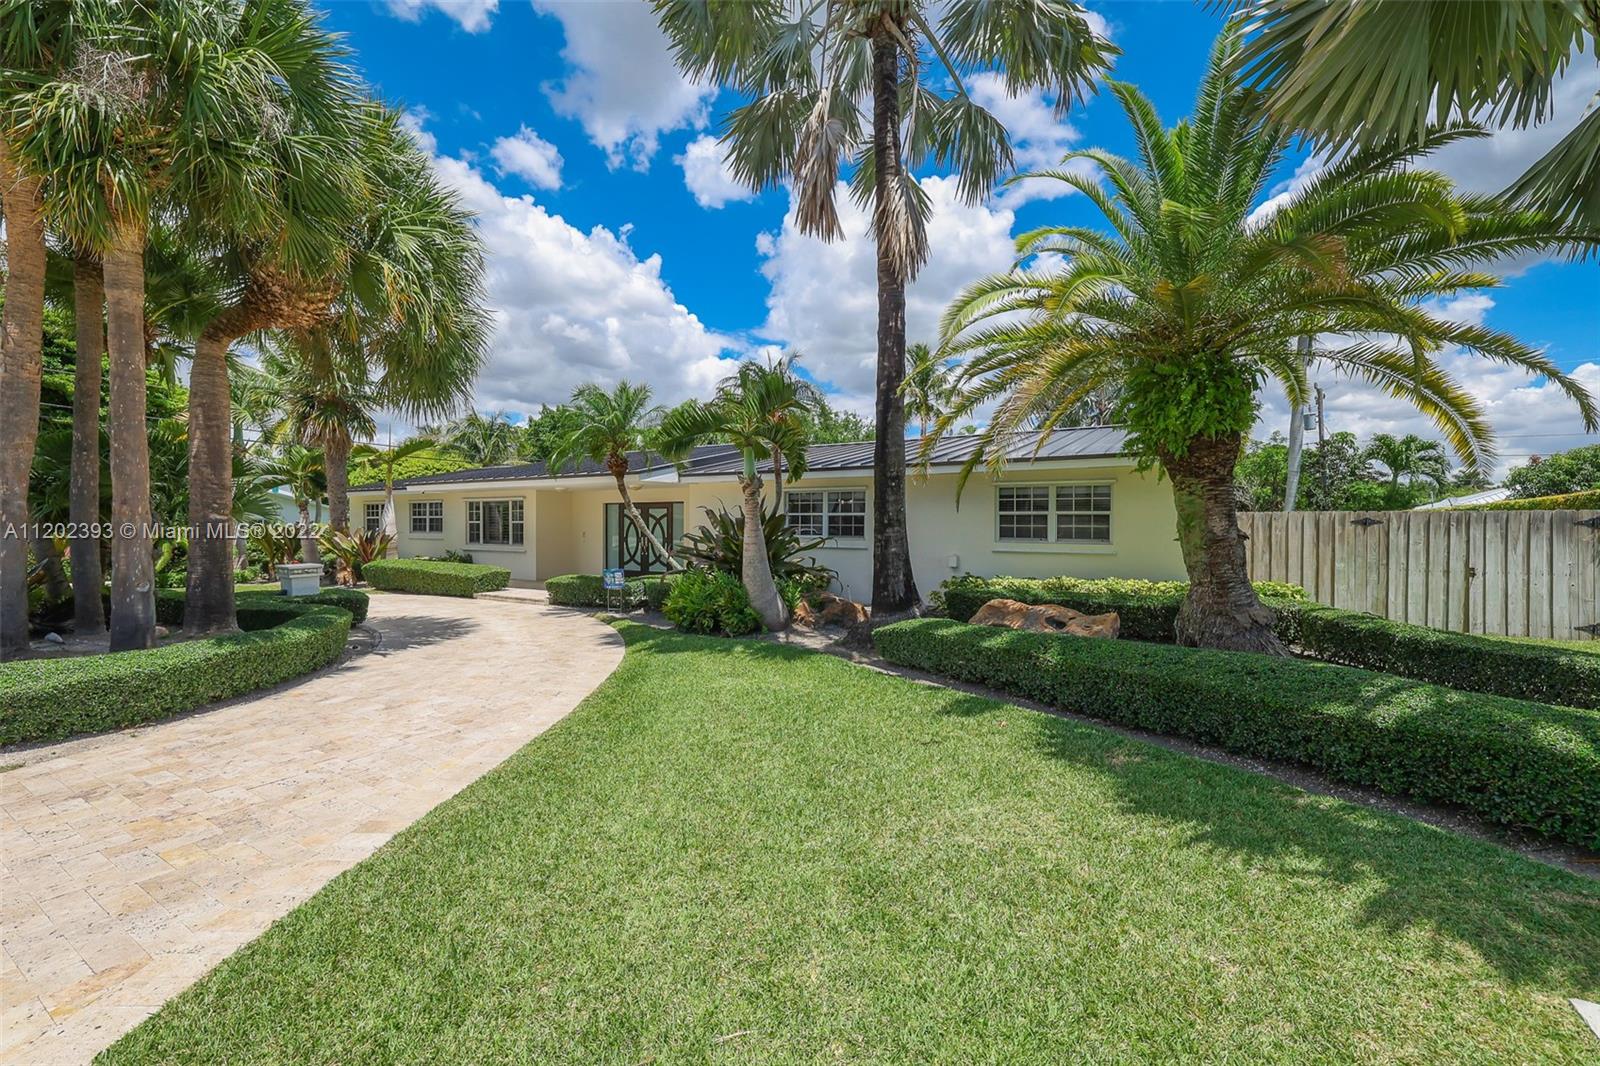 This exceptional property is located in Eureka Drive Estates. It sits on a 15,000 sqft Lot and offers 3 bedrooms, 2 bathrooms, and half, a 3-yr old metal roof, a new 1 yr old pool, a huge backyard to entertain family and friends, plus space on the side to park an RV or boat. The pipes have been lined and have a 10 Year Warrantly. This property won't last, please join us for an open house this Saturday from 12-3pm.